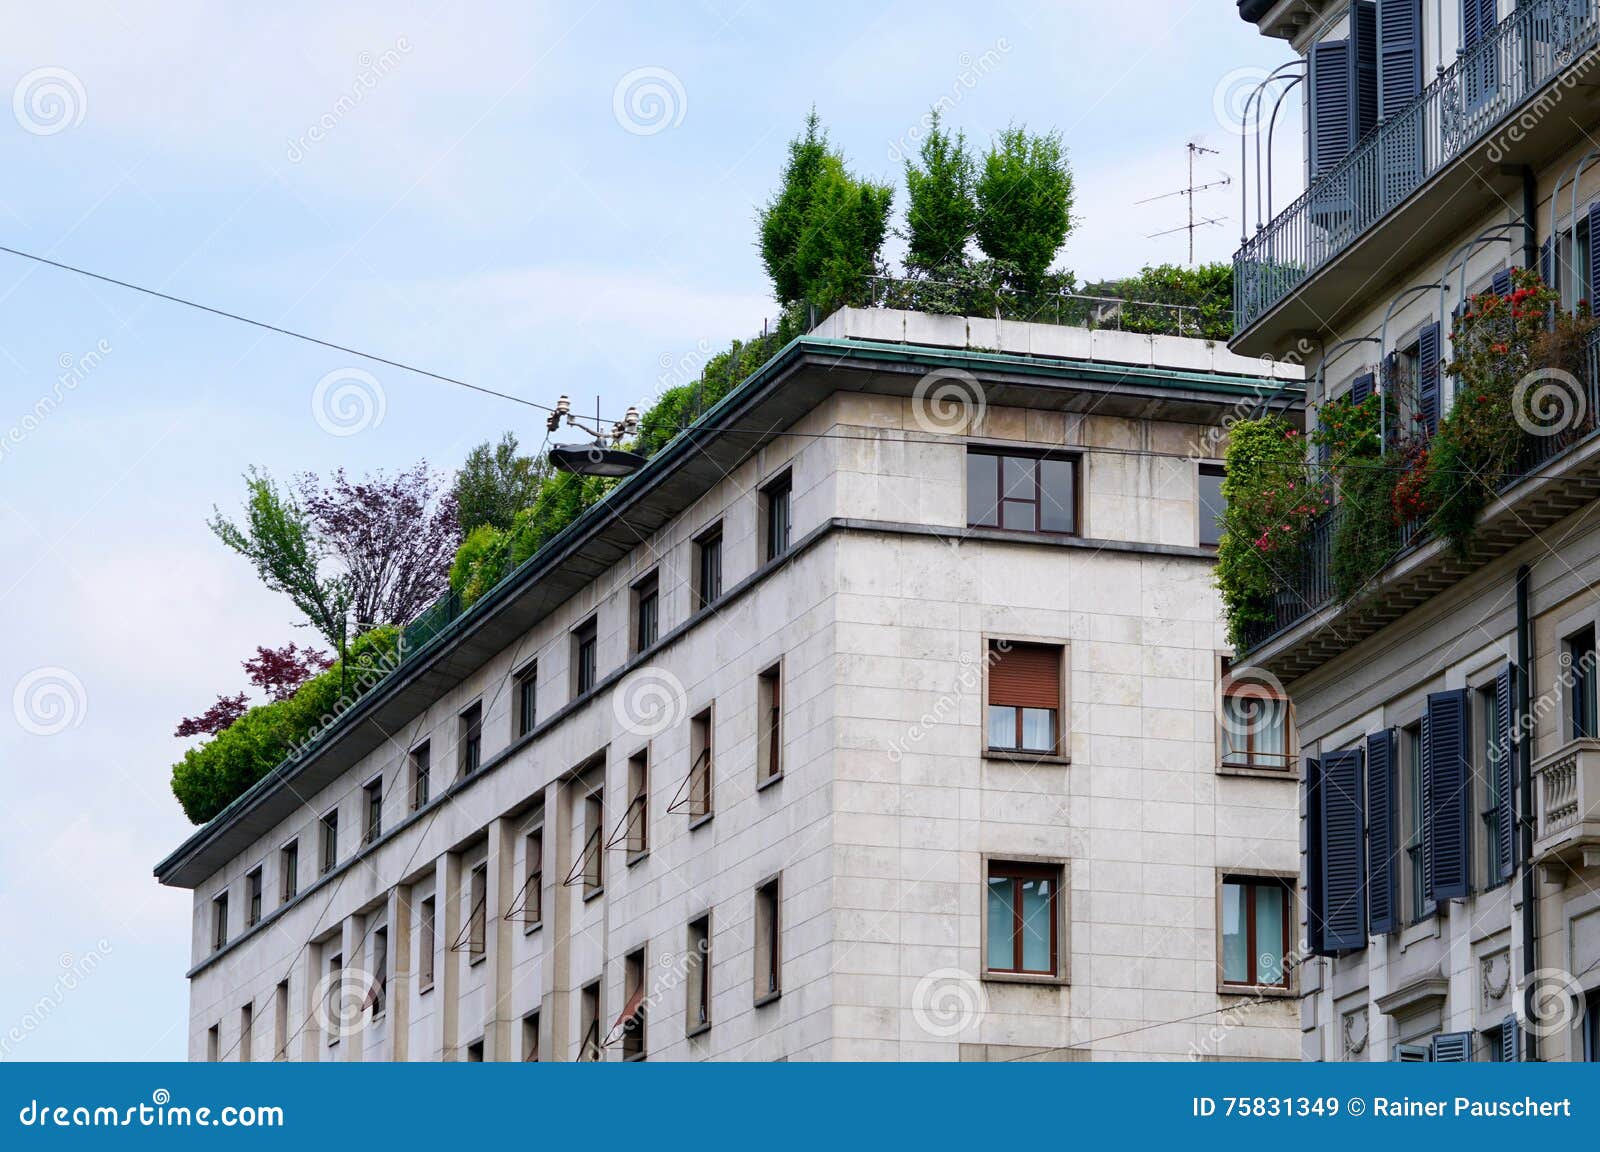 white-houses-green-roofs-milan-view-75831349.jpg